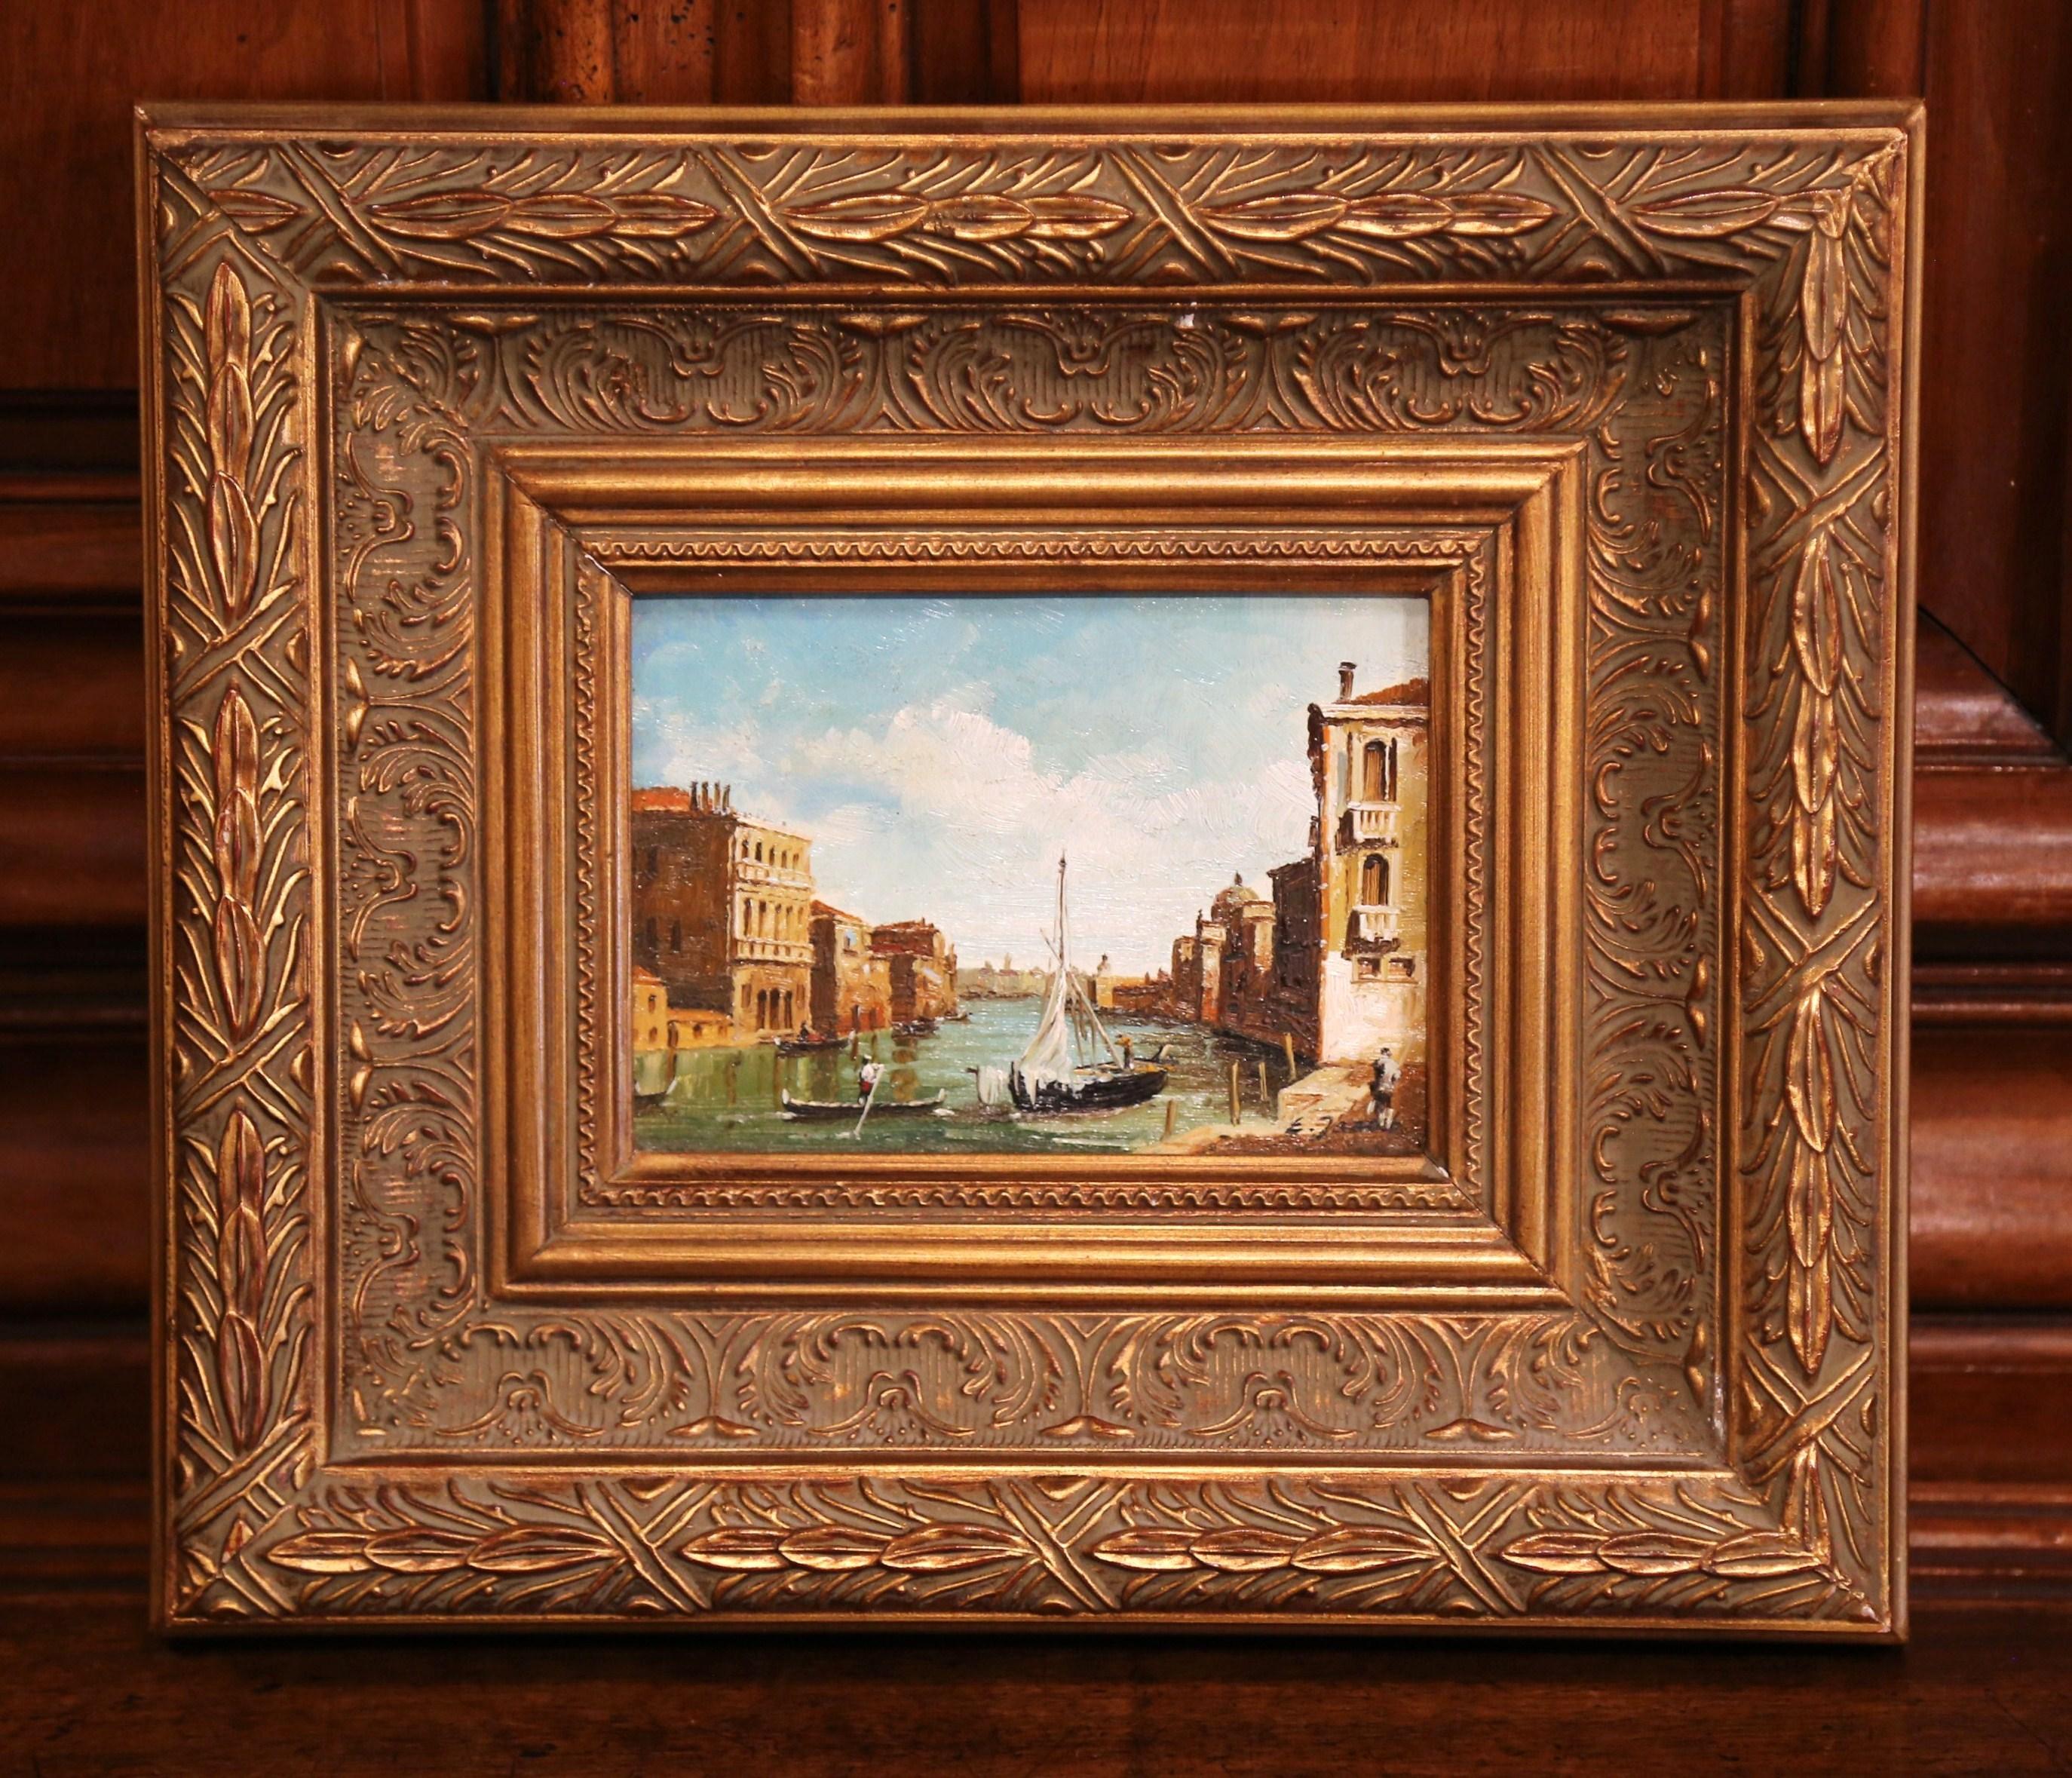 This colorful vintage oil on canvas painting was created in Italy, circa 1960. Set in an ornate gilt frame, the painting depicts a harbor scene with old structures on both sides. The lively features boats and sailboat under a beautiful sunset. The